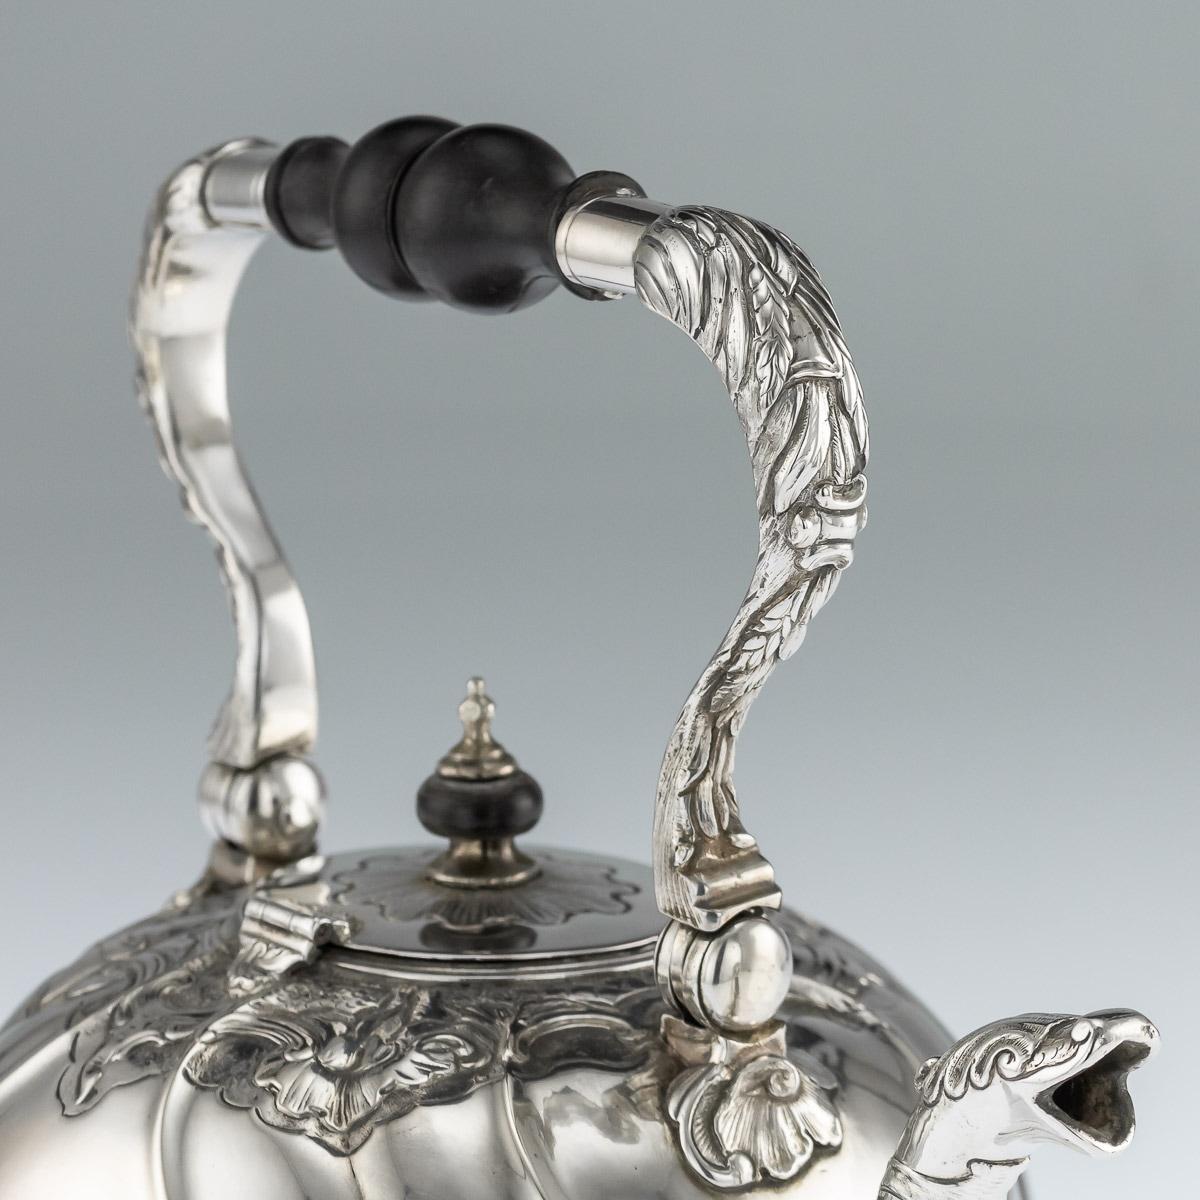 Antique Imperial Russian Solid Silver Tea Kettle on Stand, Moscow, circa 1761 5